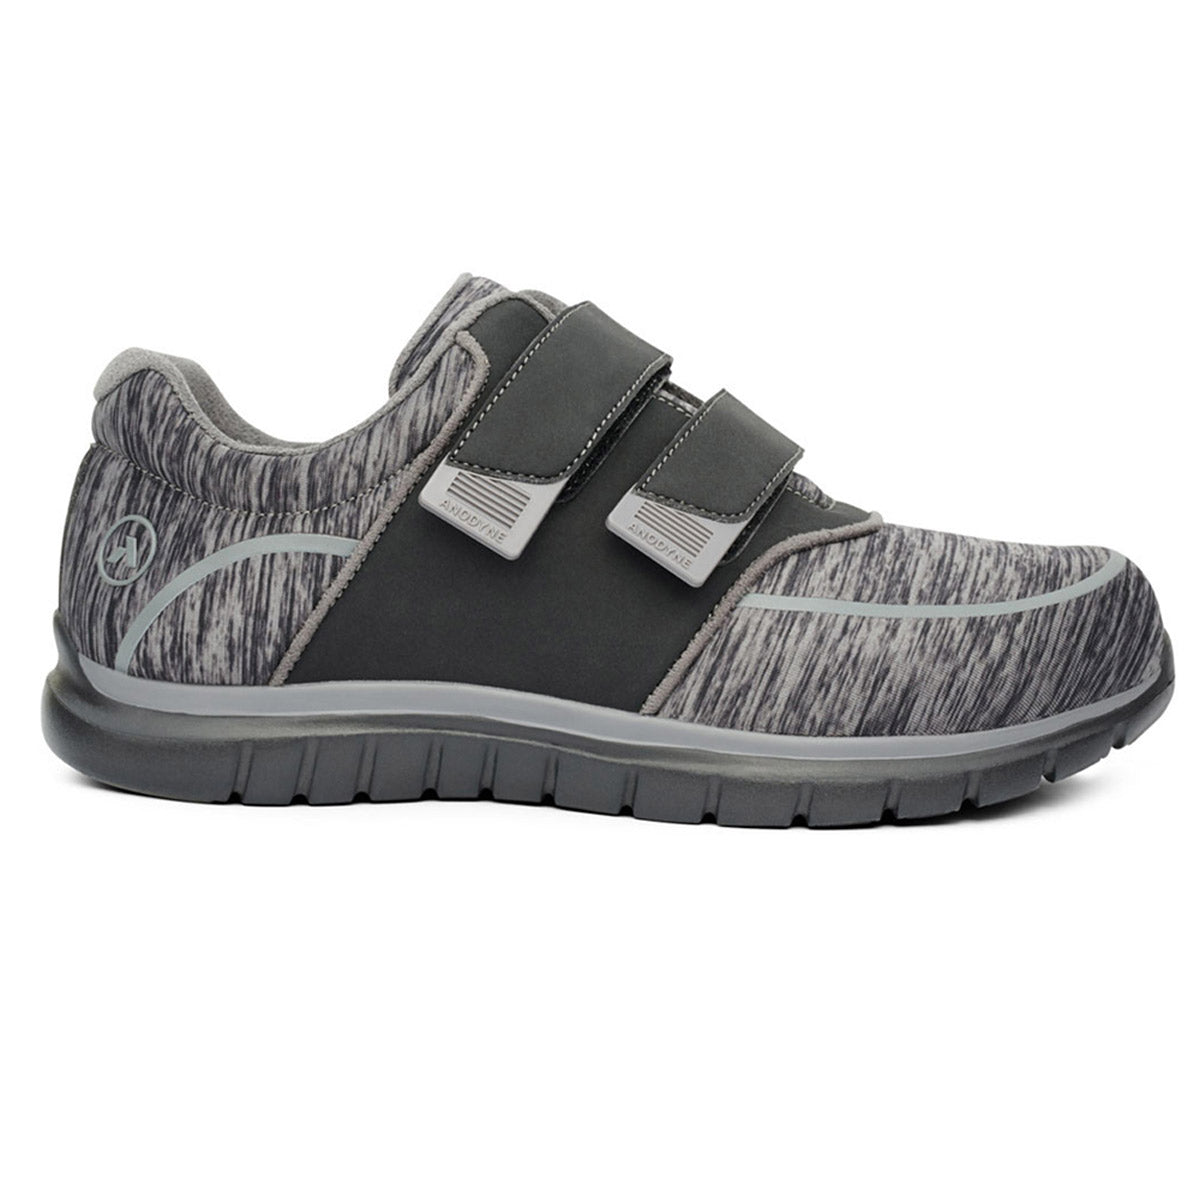 Anodyne gray athletic shoe with hook-and-loop straps and an anti-microbial protectant.